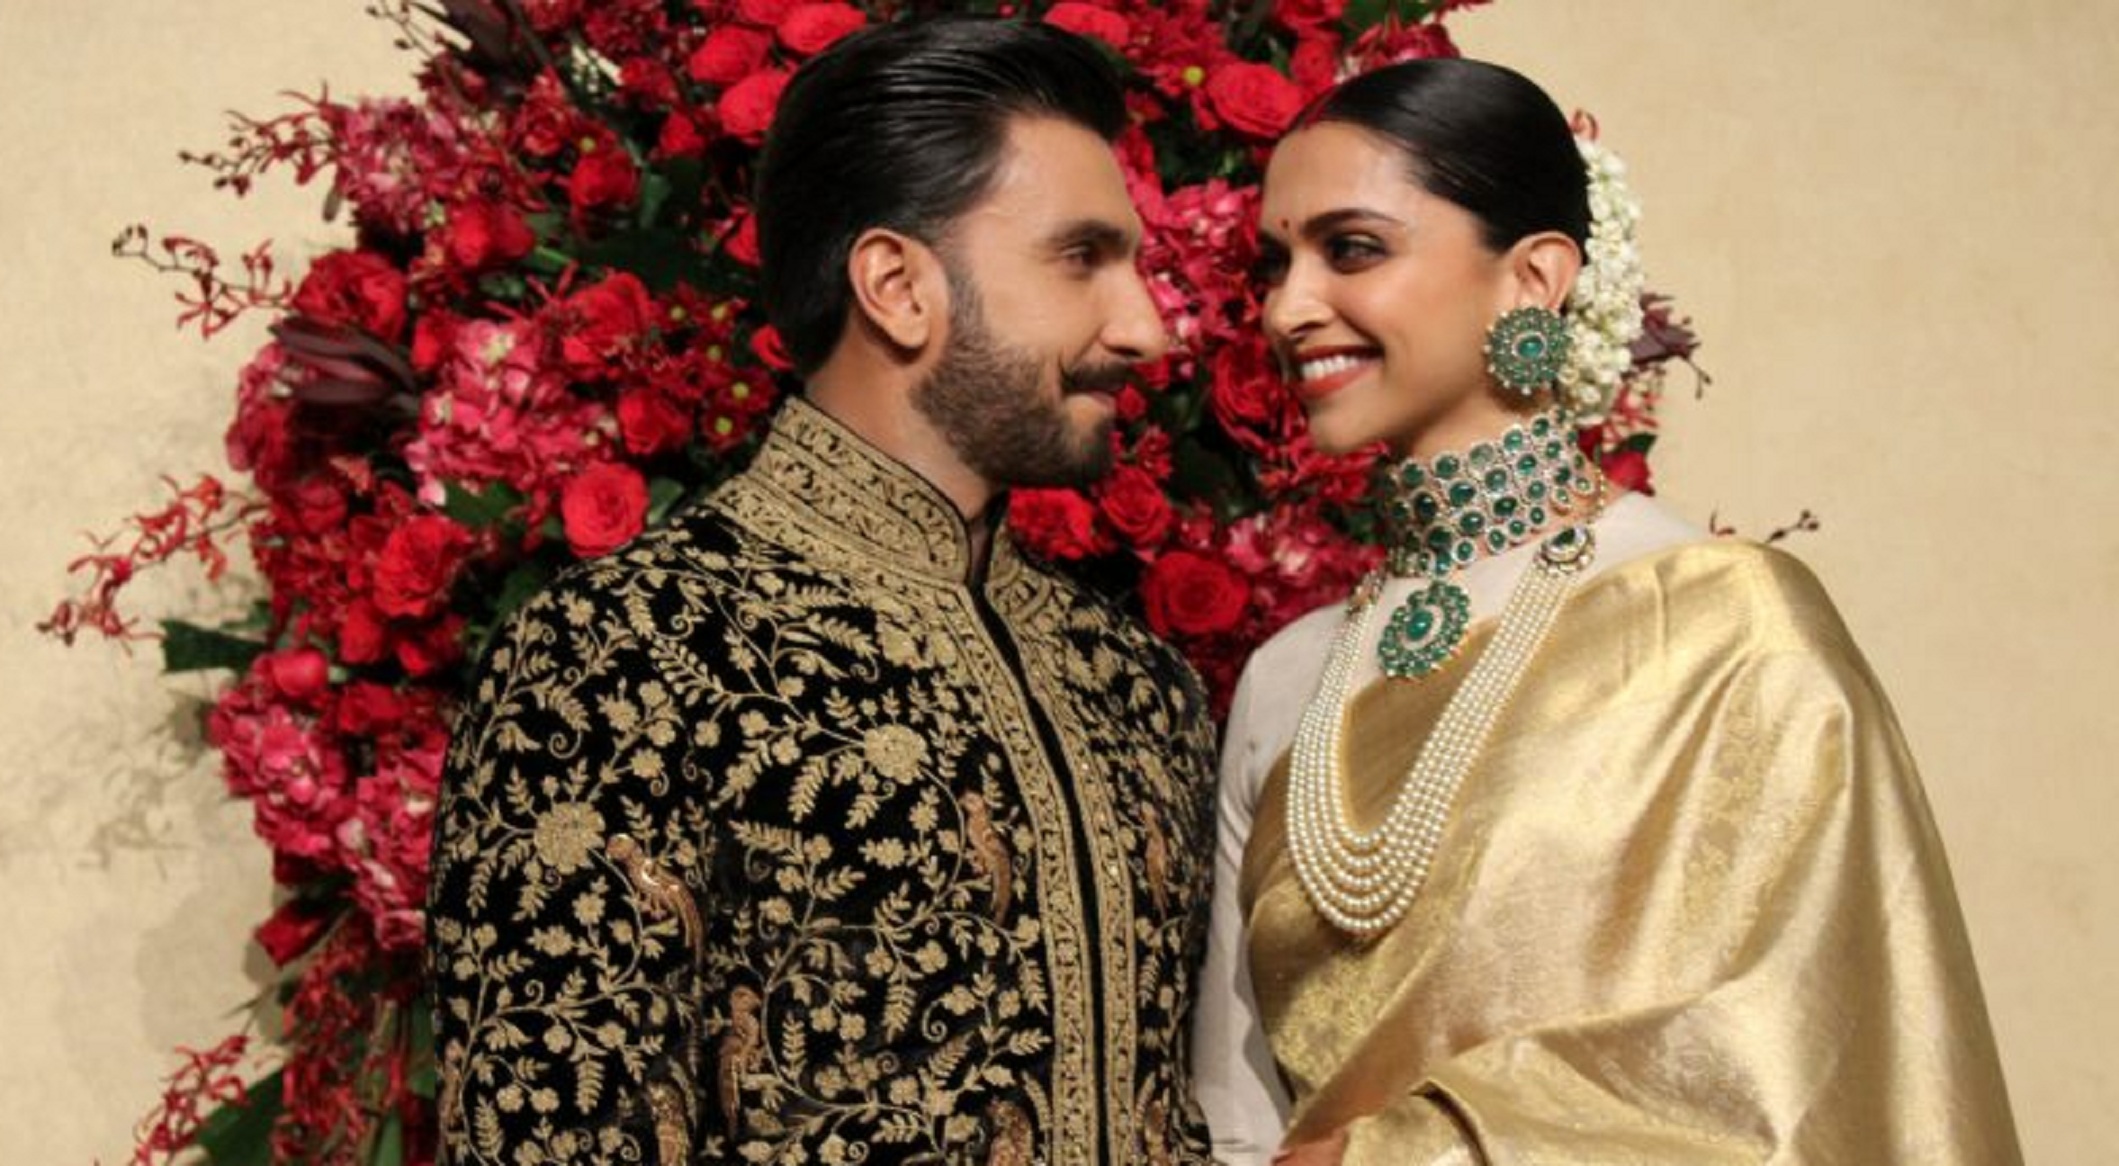 “I Married The Most Beautiful Girl In The World”: Ranveer Singh Gushes About Deepika At Their Recent Wedding Party